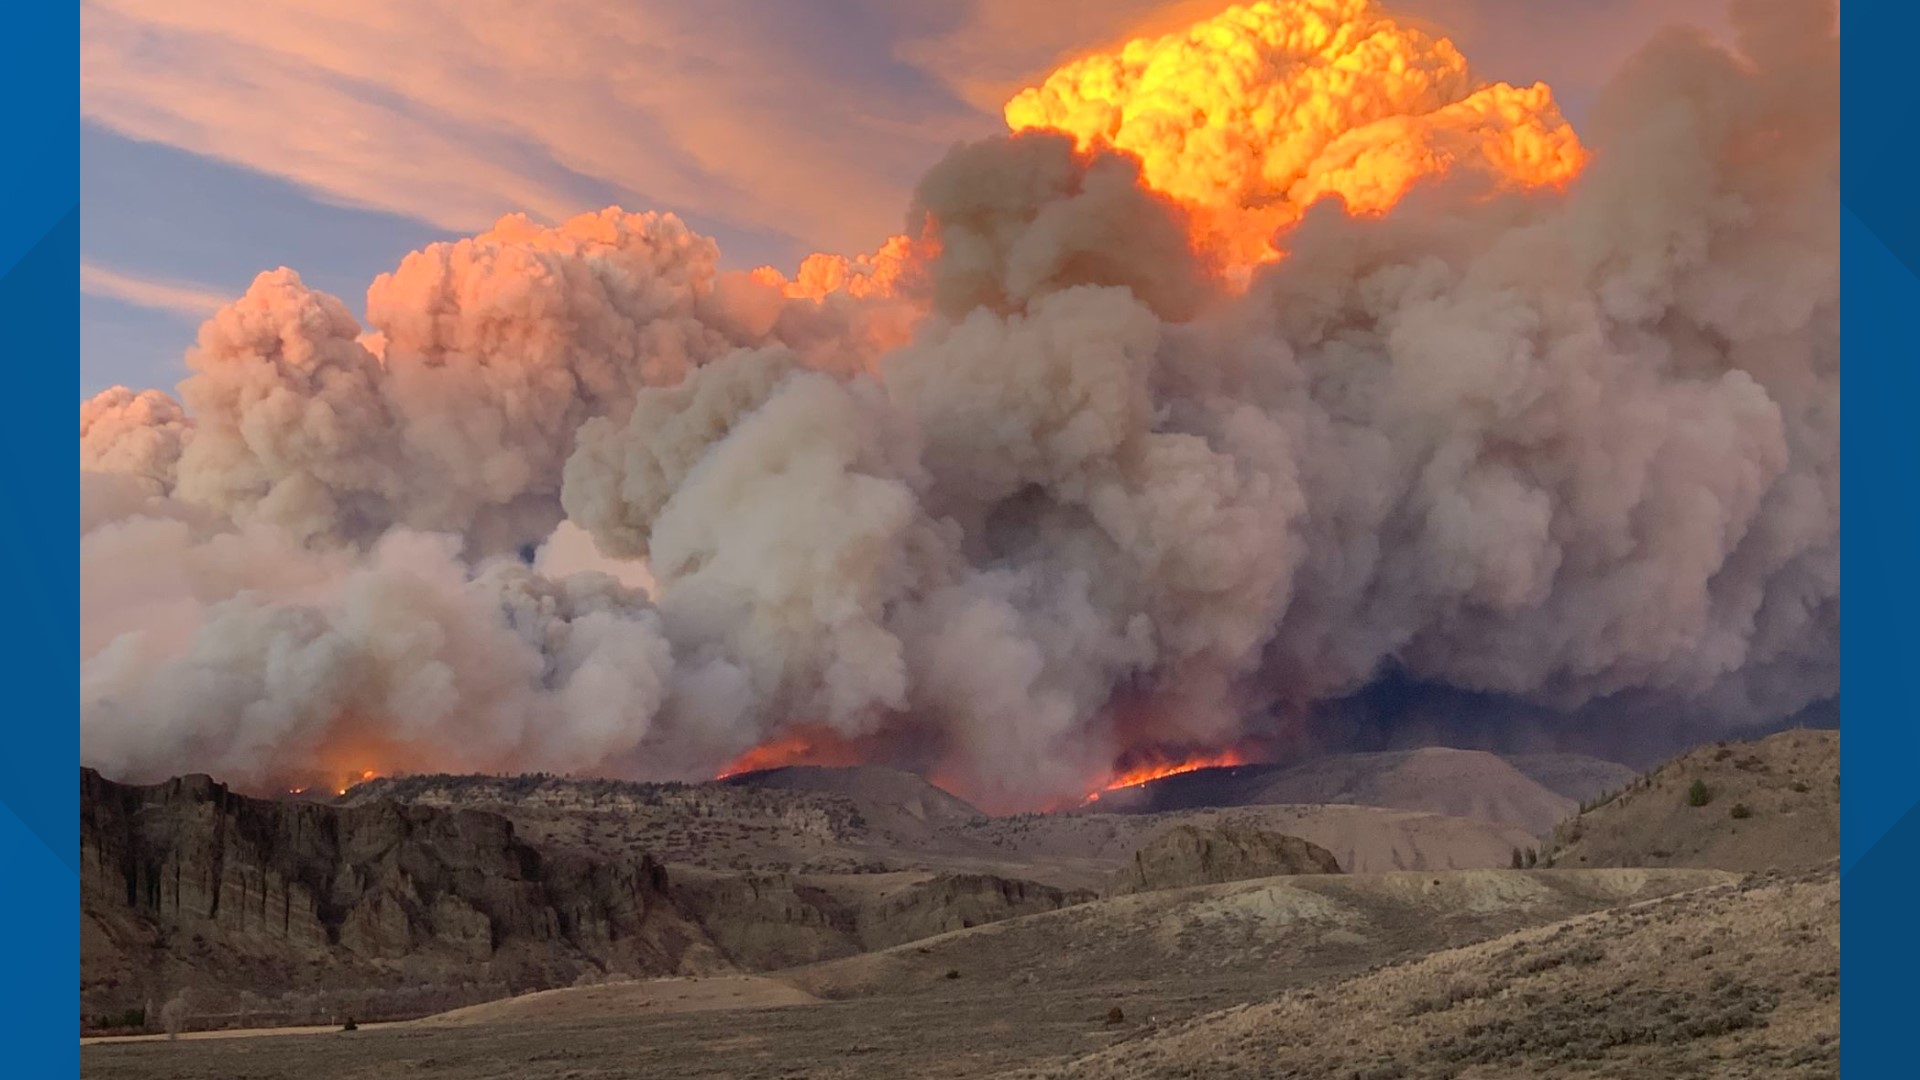 The fire has grown by about 146,000 acres since Wednesday, fueled by strong winds and extreme drought conditions.